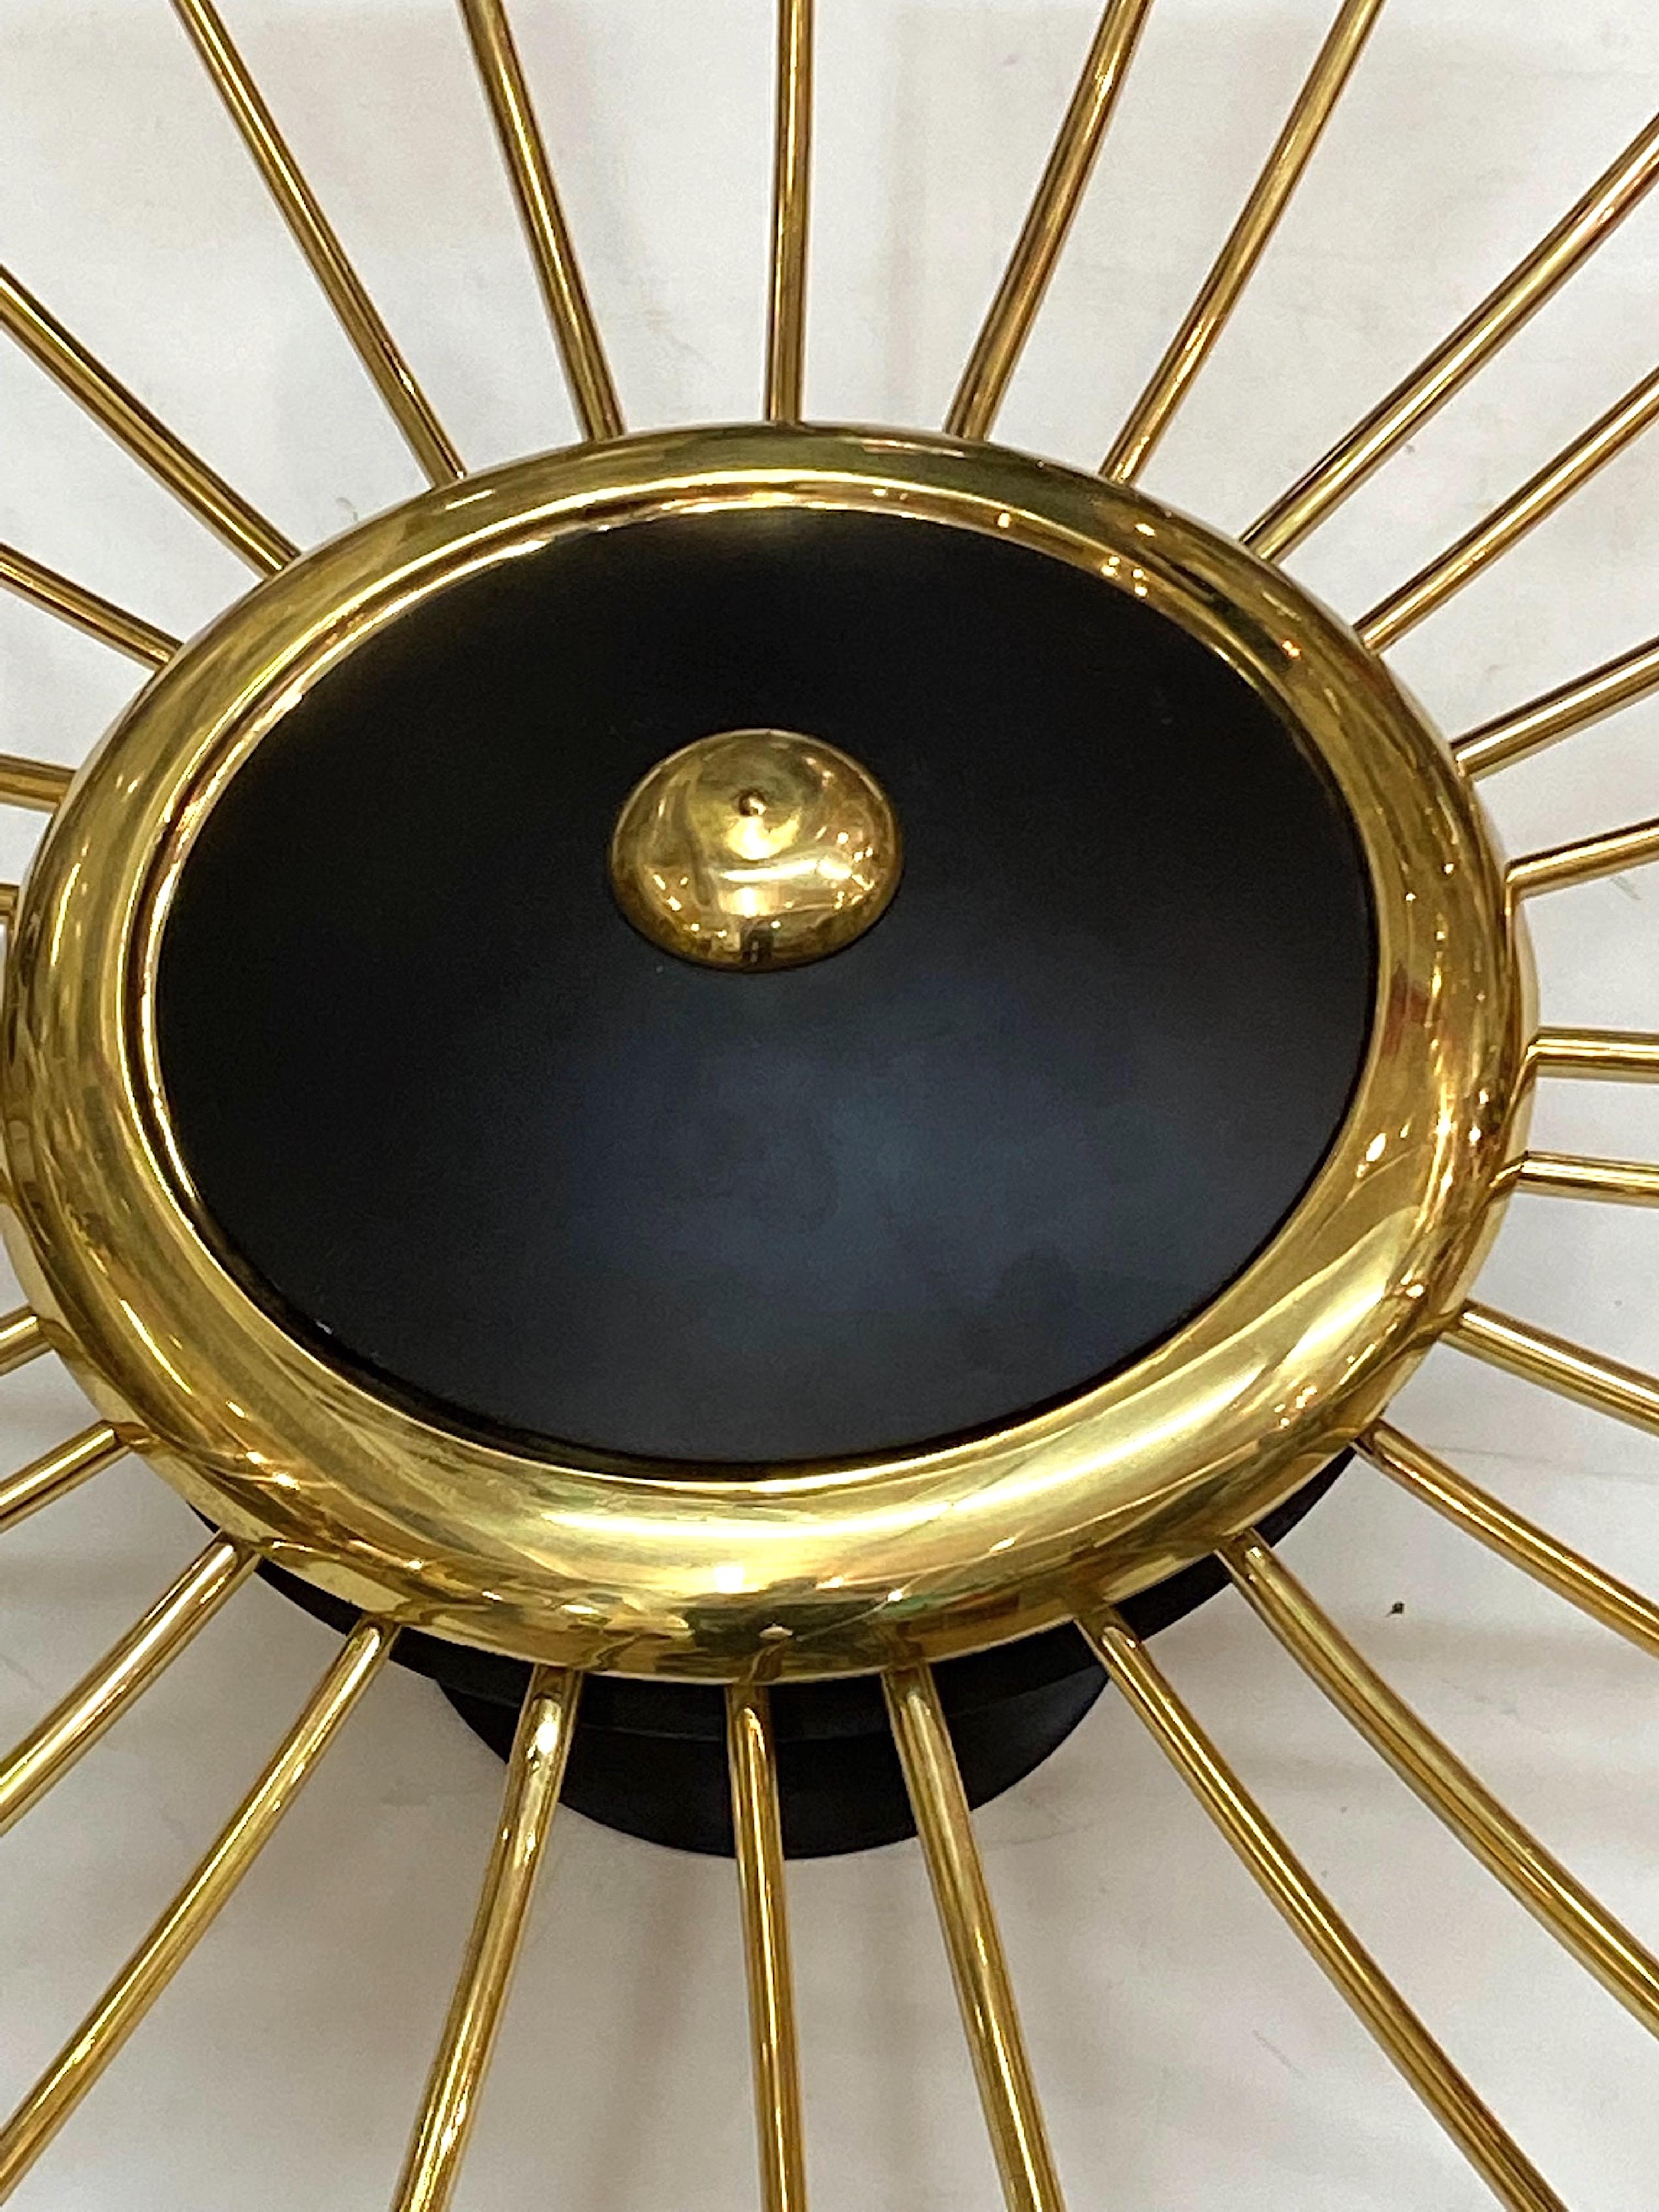 A spectacular and large 1950s Italian brass and black enamel light fixture in a star-burst design. The light measures 34 inches in diameter and is a direct to ceiling mount. There is a main central dish from which 14 alternating decorative brass